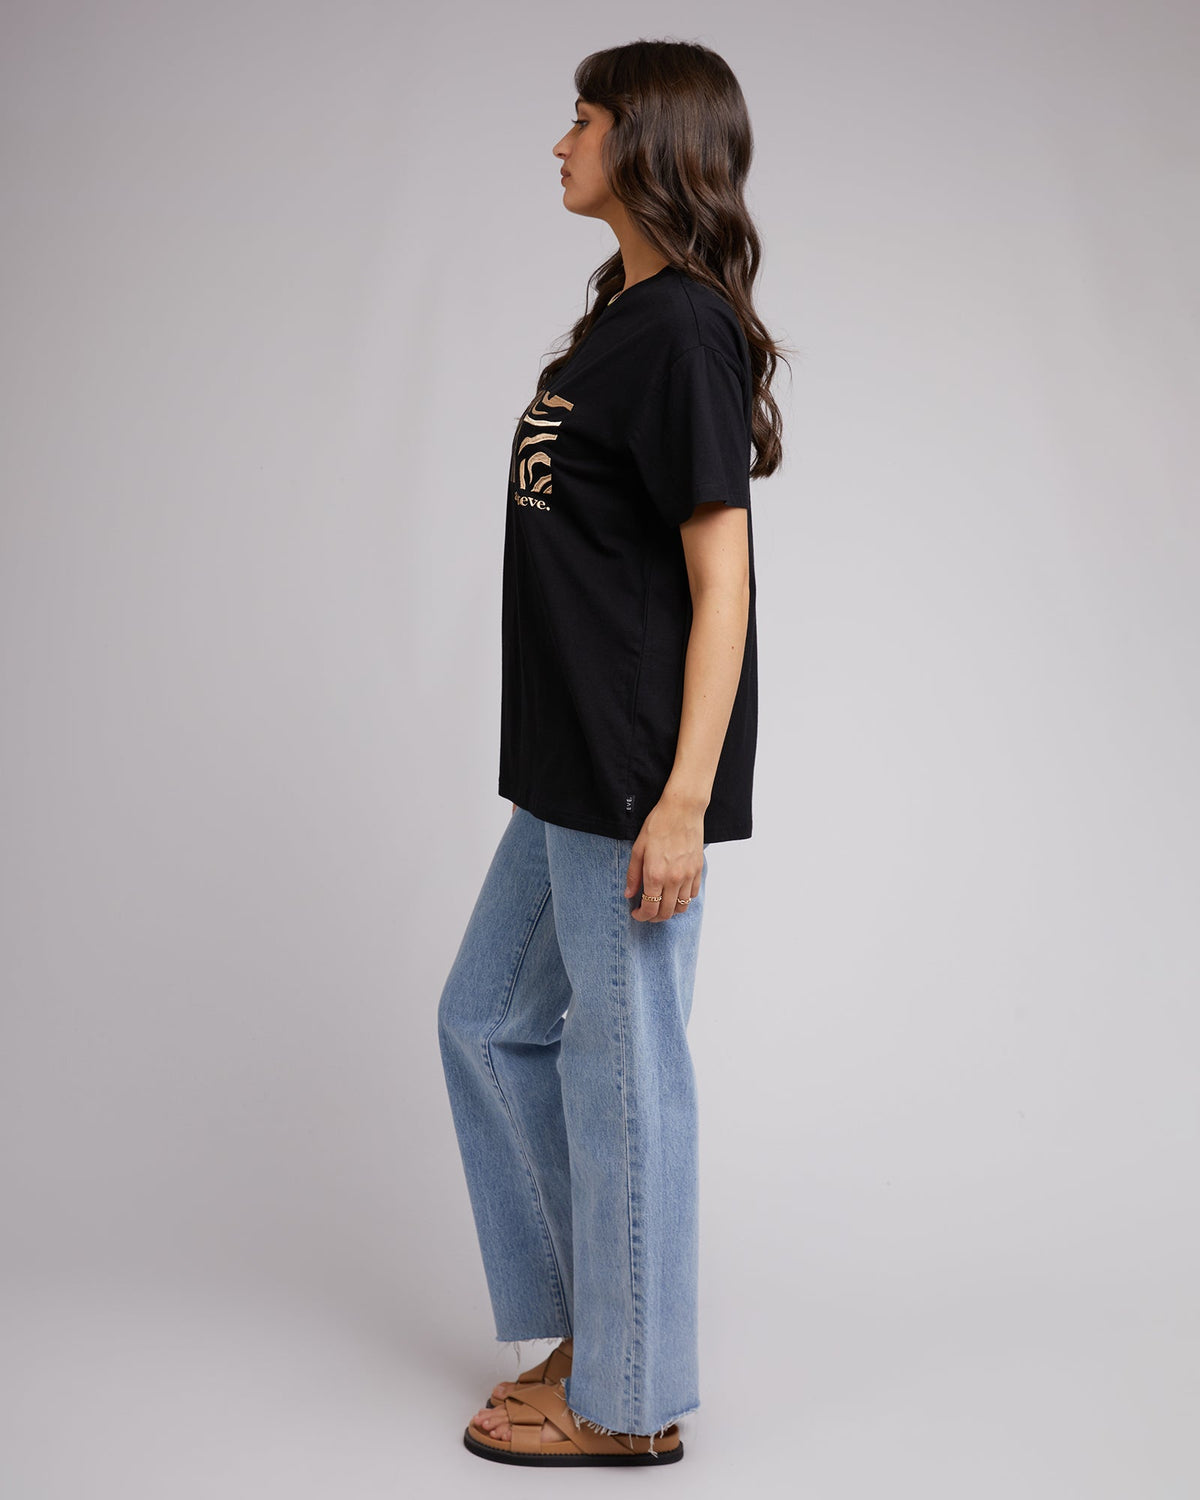 All About Eve-Ziggy Tee Black-Edge Clothing